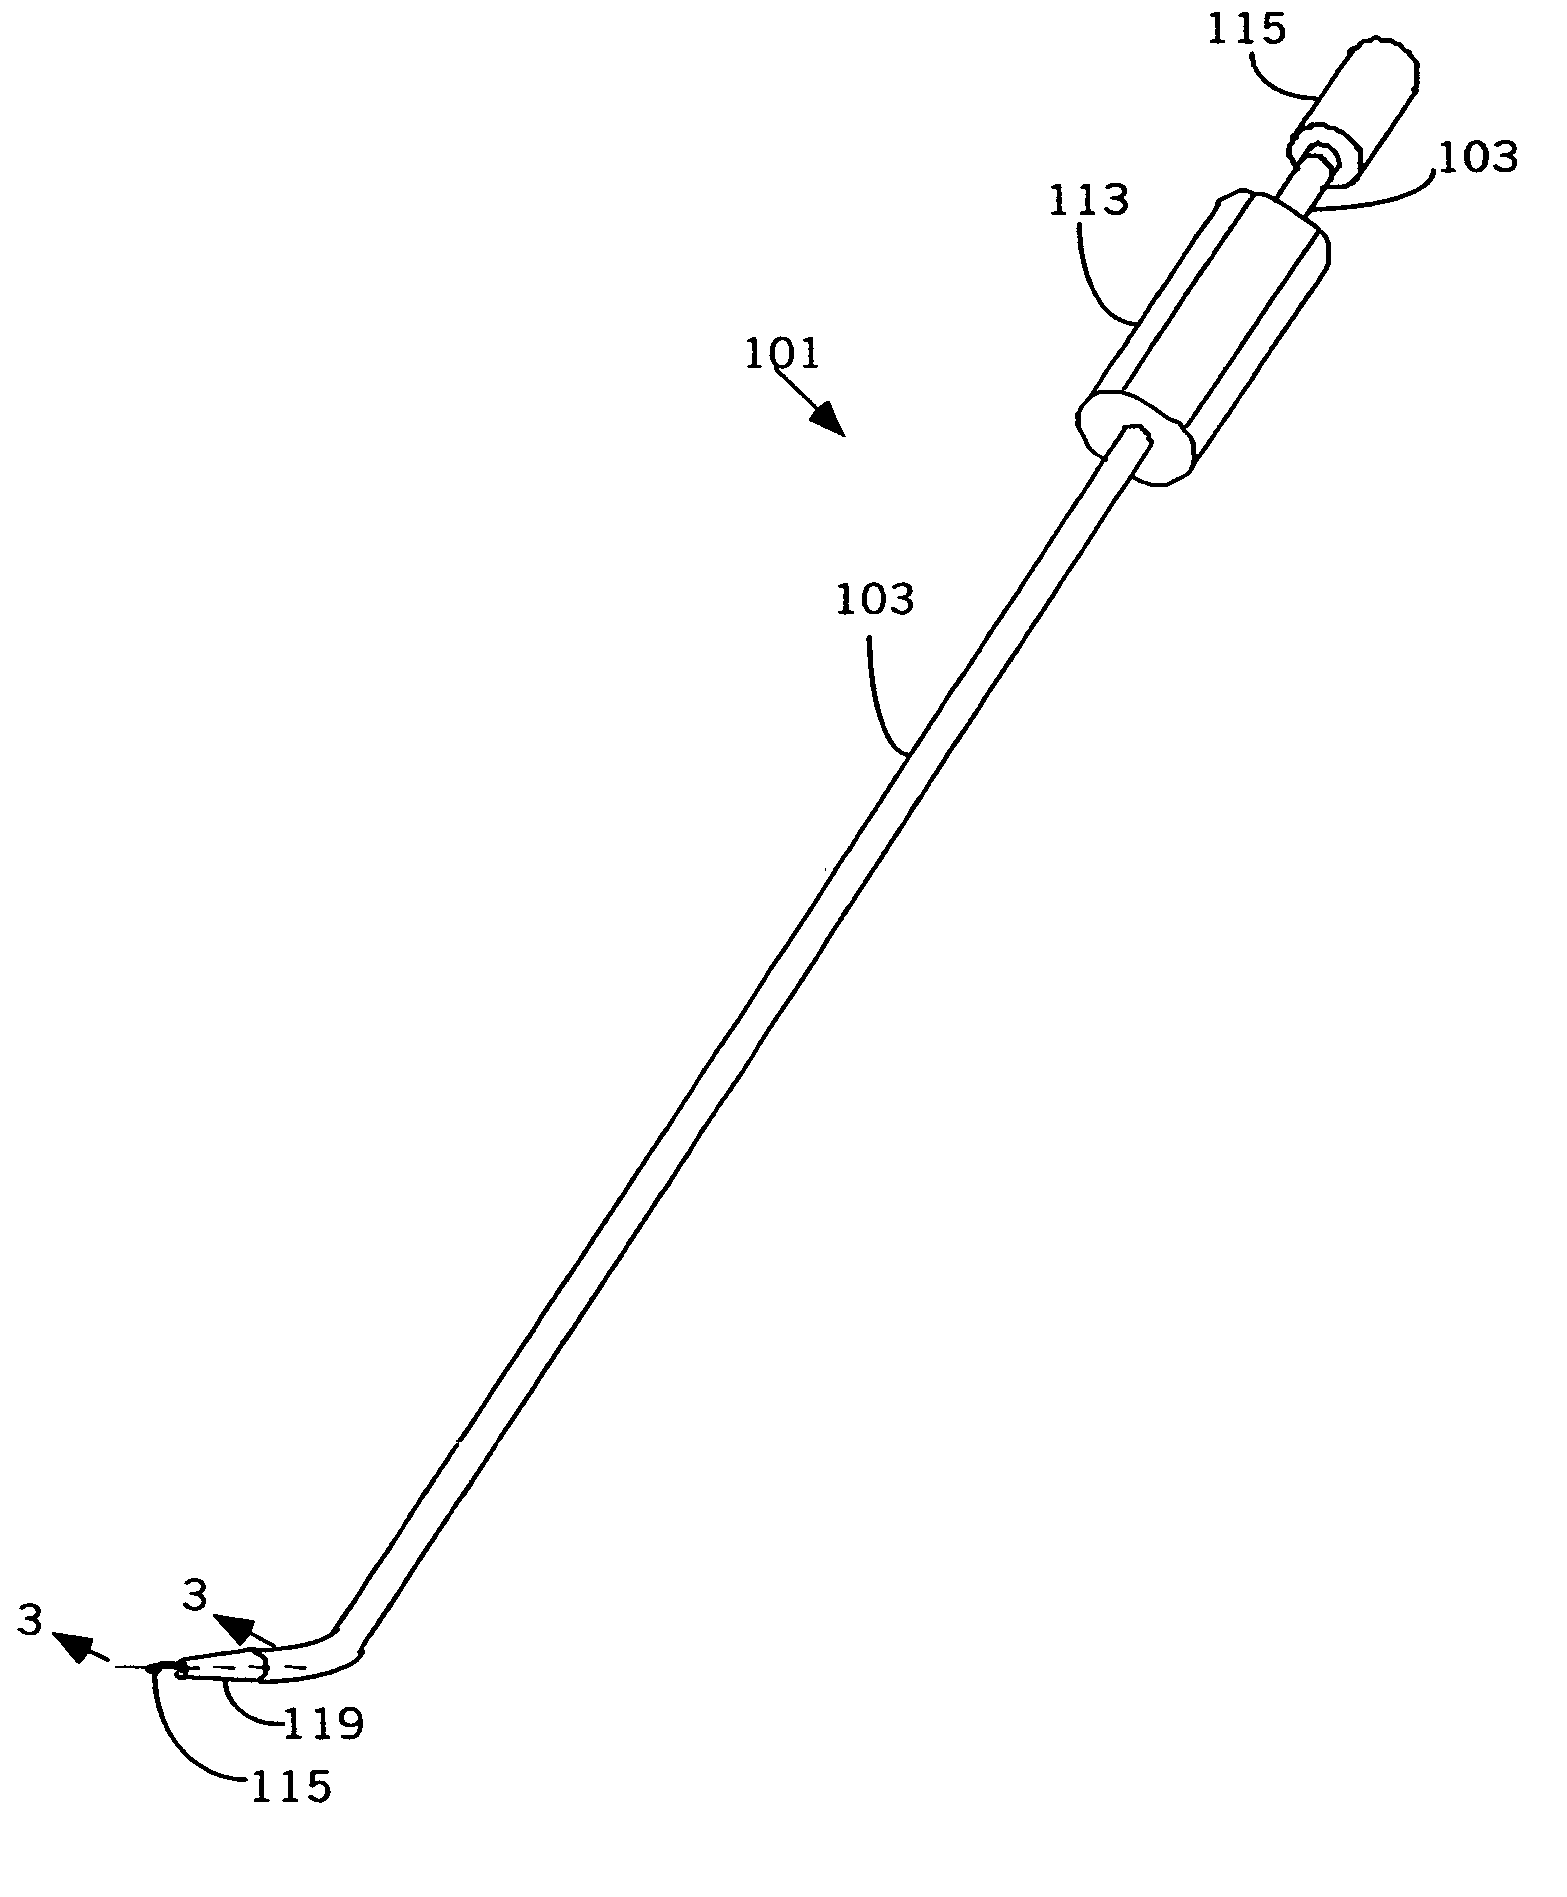 Pubovaginal sling implanter and procedure for the usage